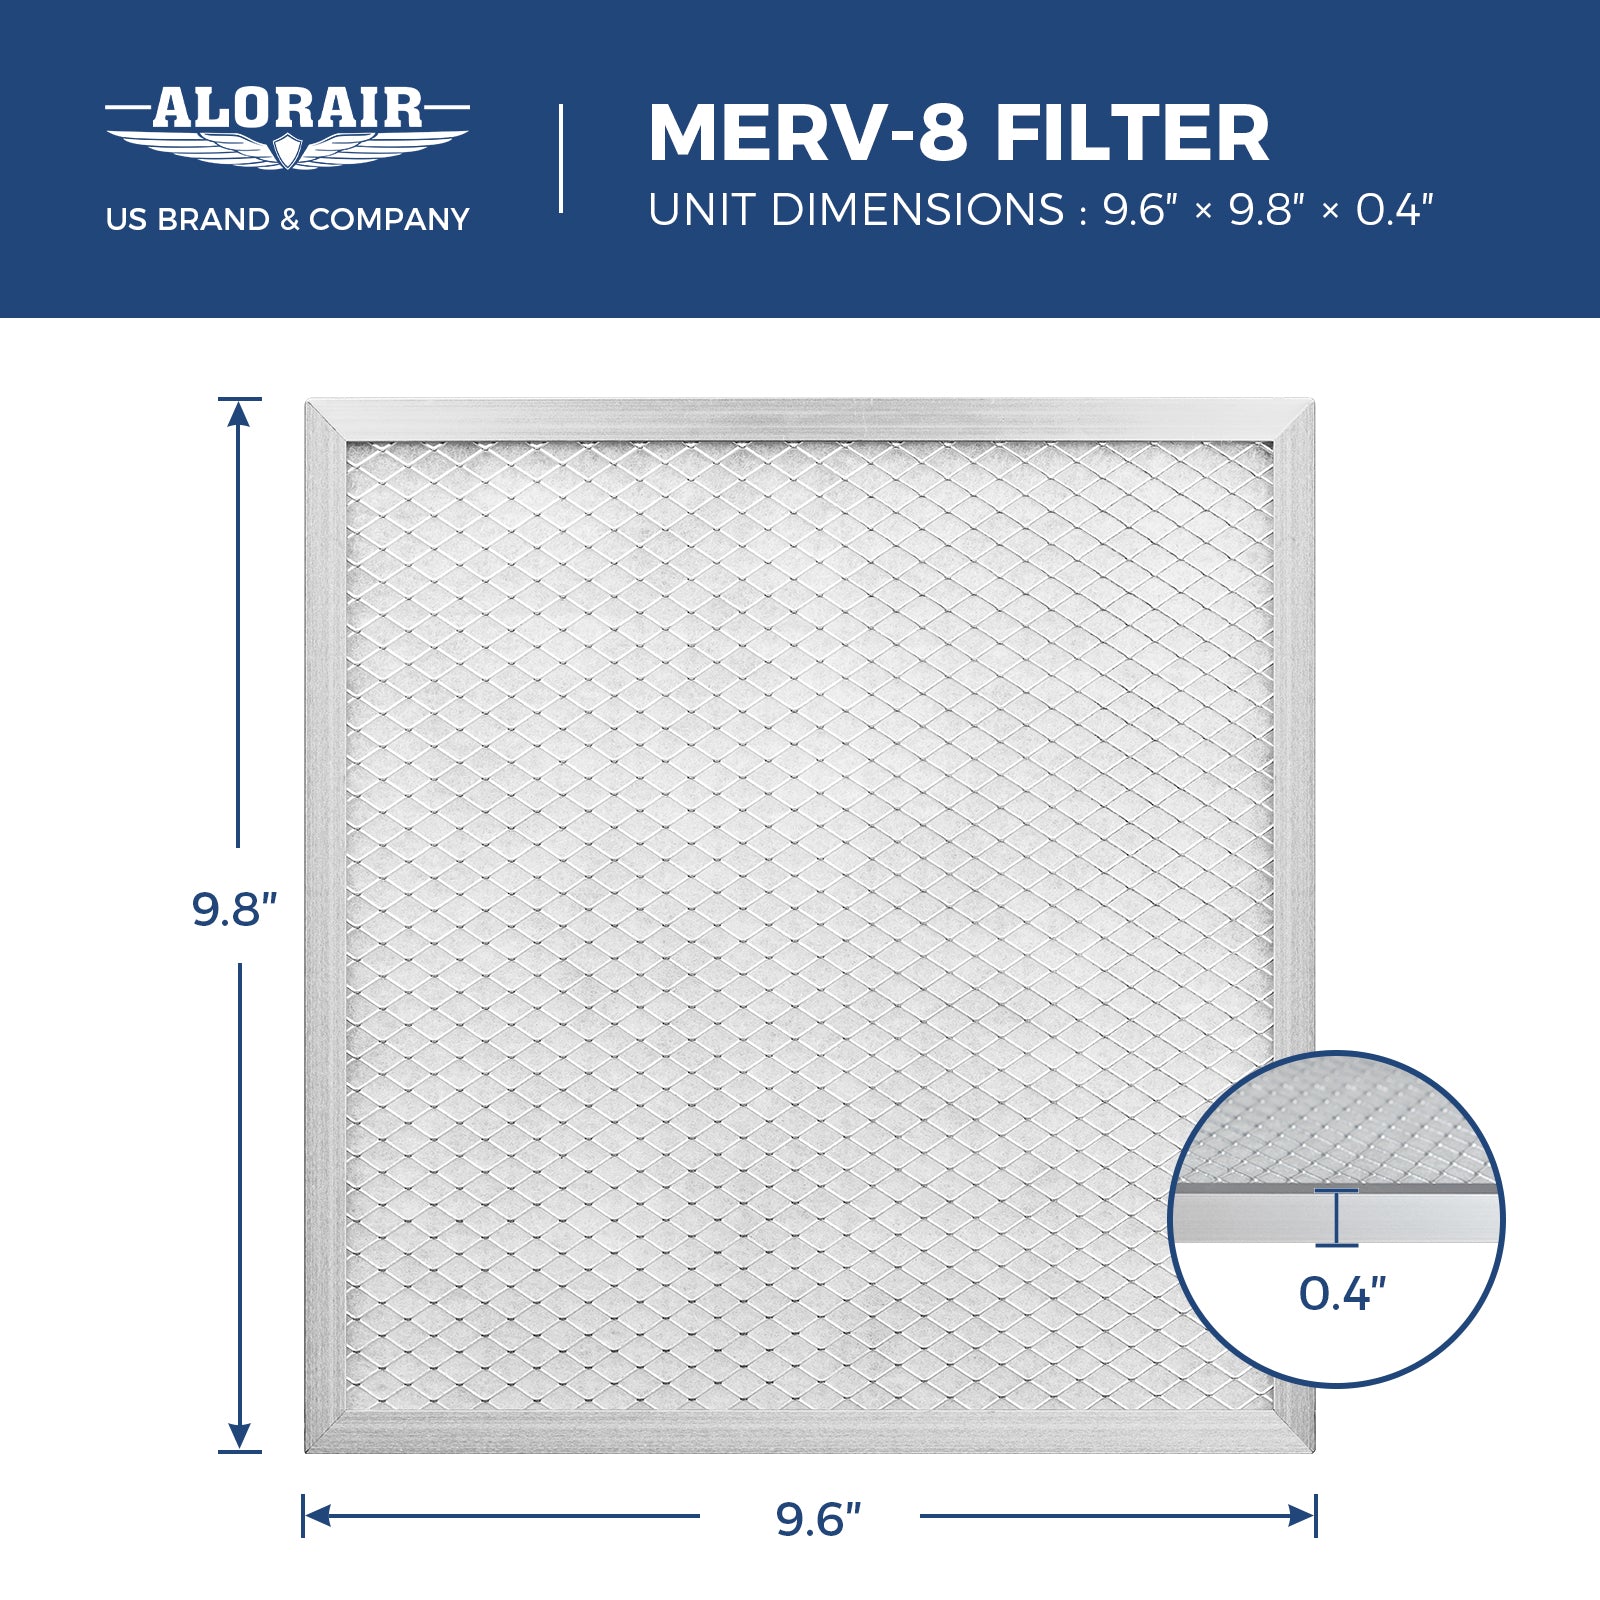 Upgrade to AlorAir MERV-8 filter with 9.6"x9.8"x0.4" dimensions for cleaner air in your home or office.